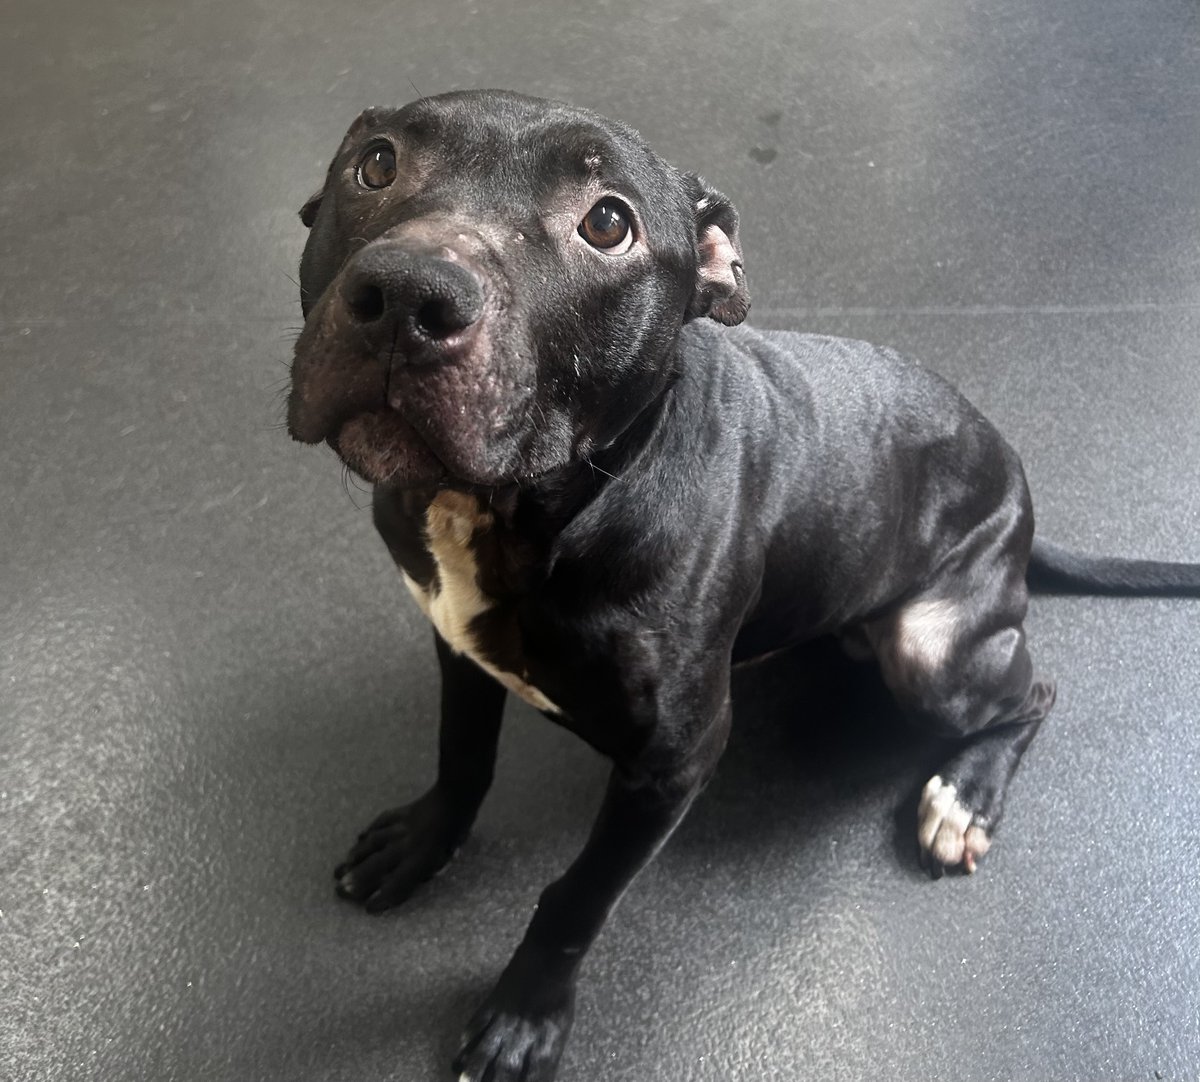 Please retweet to help Bagheera find a home #SHEFFIELD #YORKSHIRE #UK Bagheera was found tied up & abandoned in a very poor state. Bagheera was emaciated & had several gaping wounds to his neck, presumably puncture wounds from dog bites. Treated with antibiotics, pain relief &…